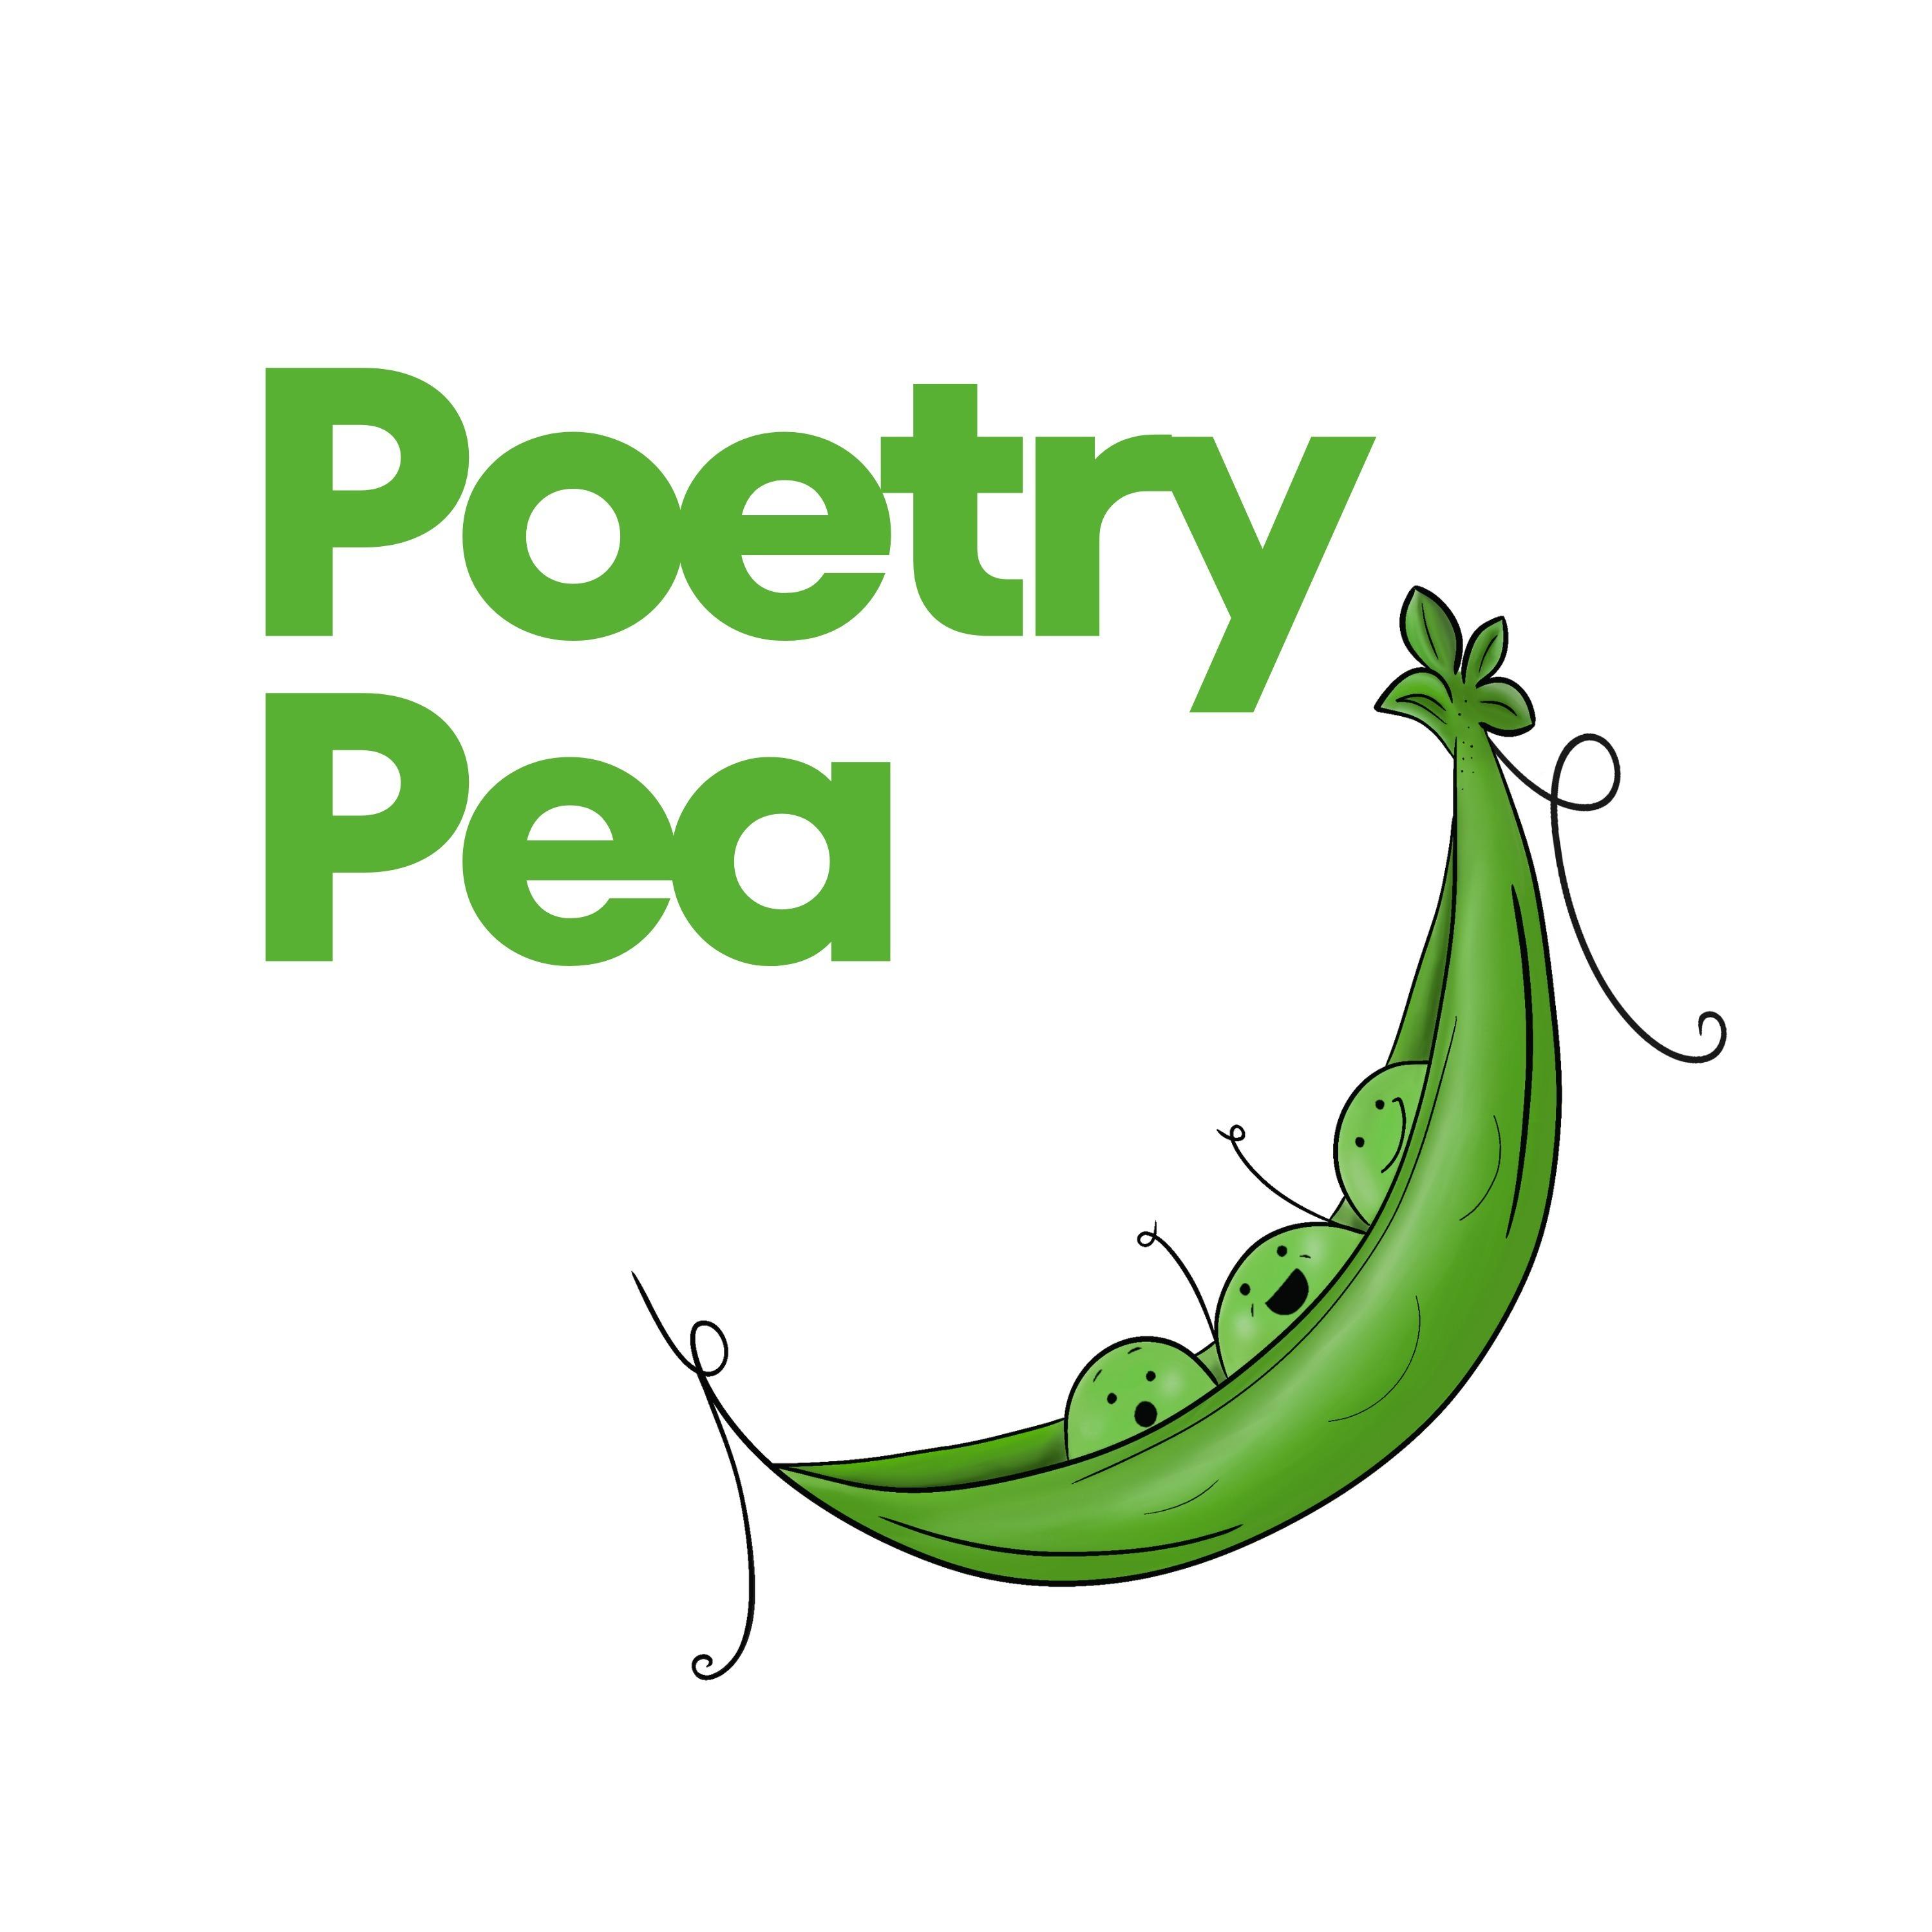 Poetry Pea - haiku and other English Language Japanese short forms